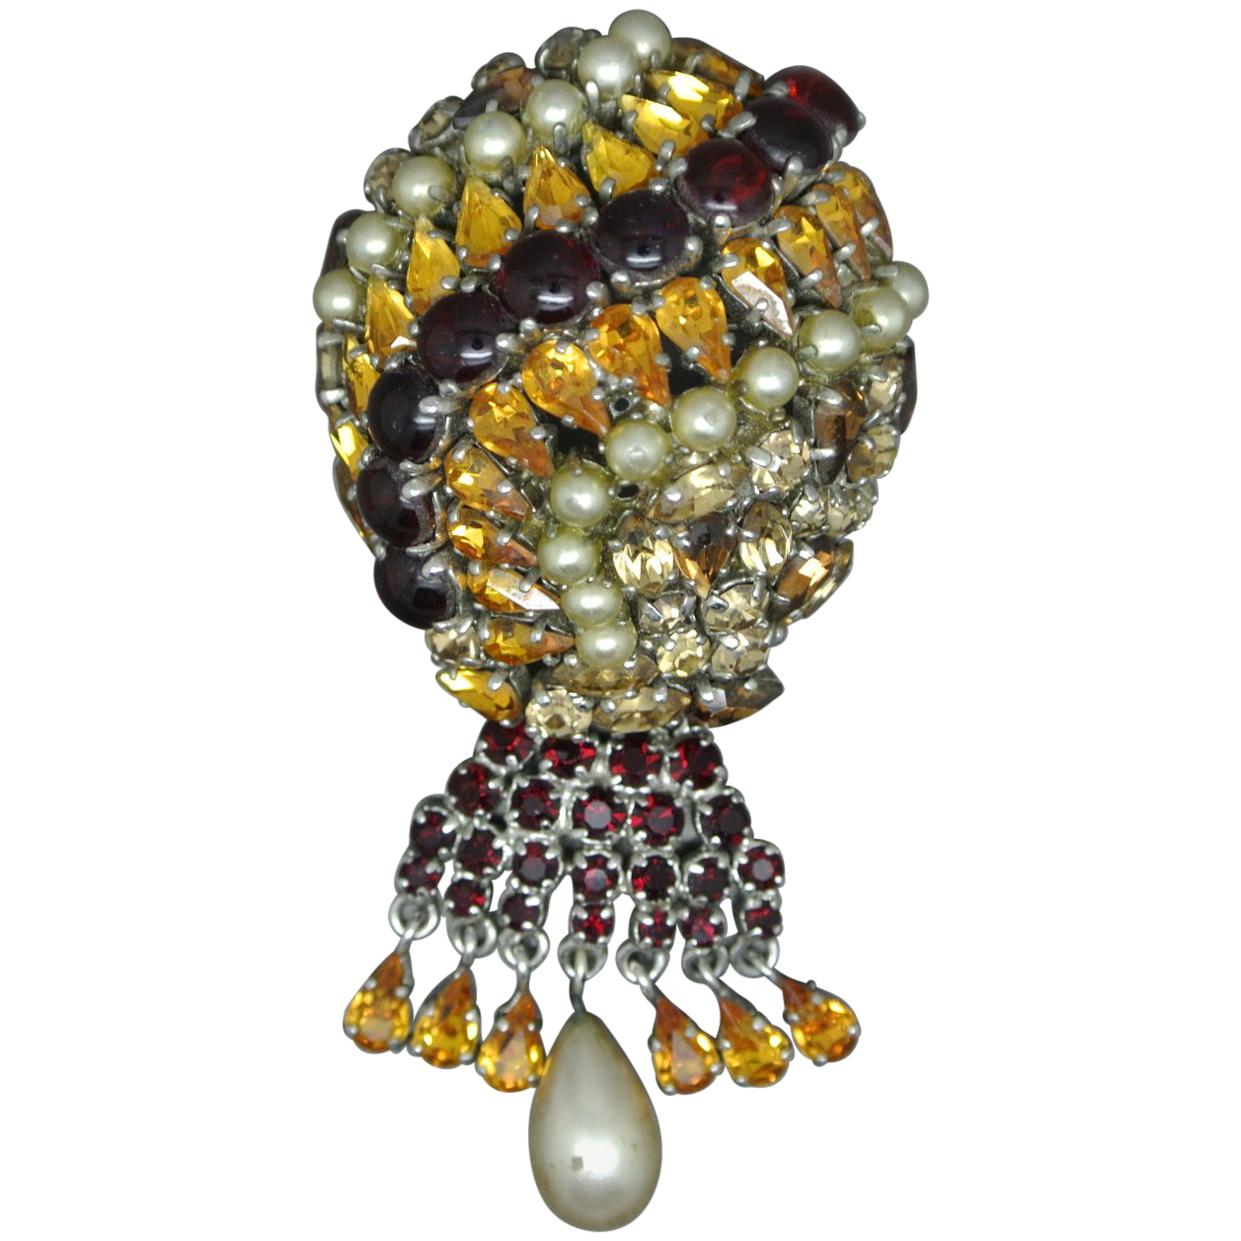 Christian Dior 1962 Red Citron Glass Faux Pearl Drops Balloon Brooch